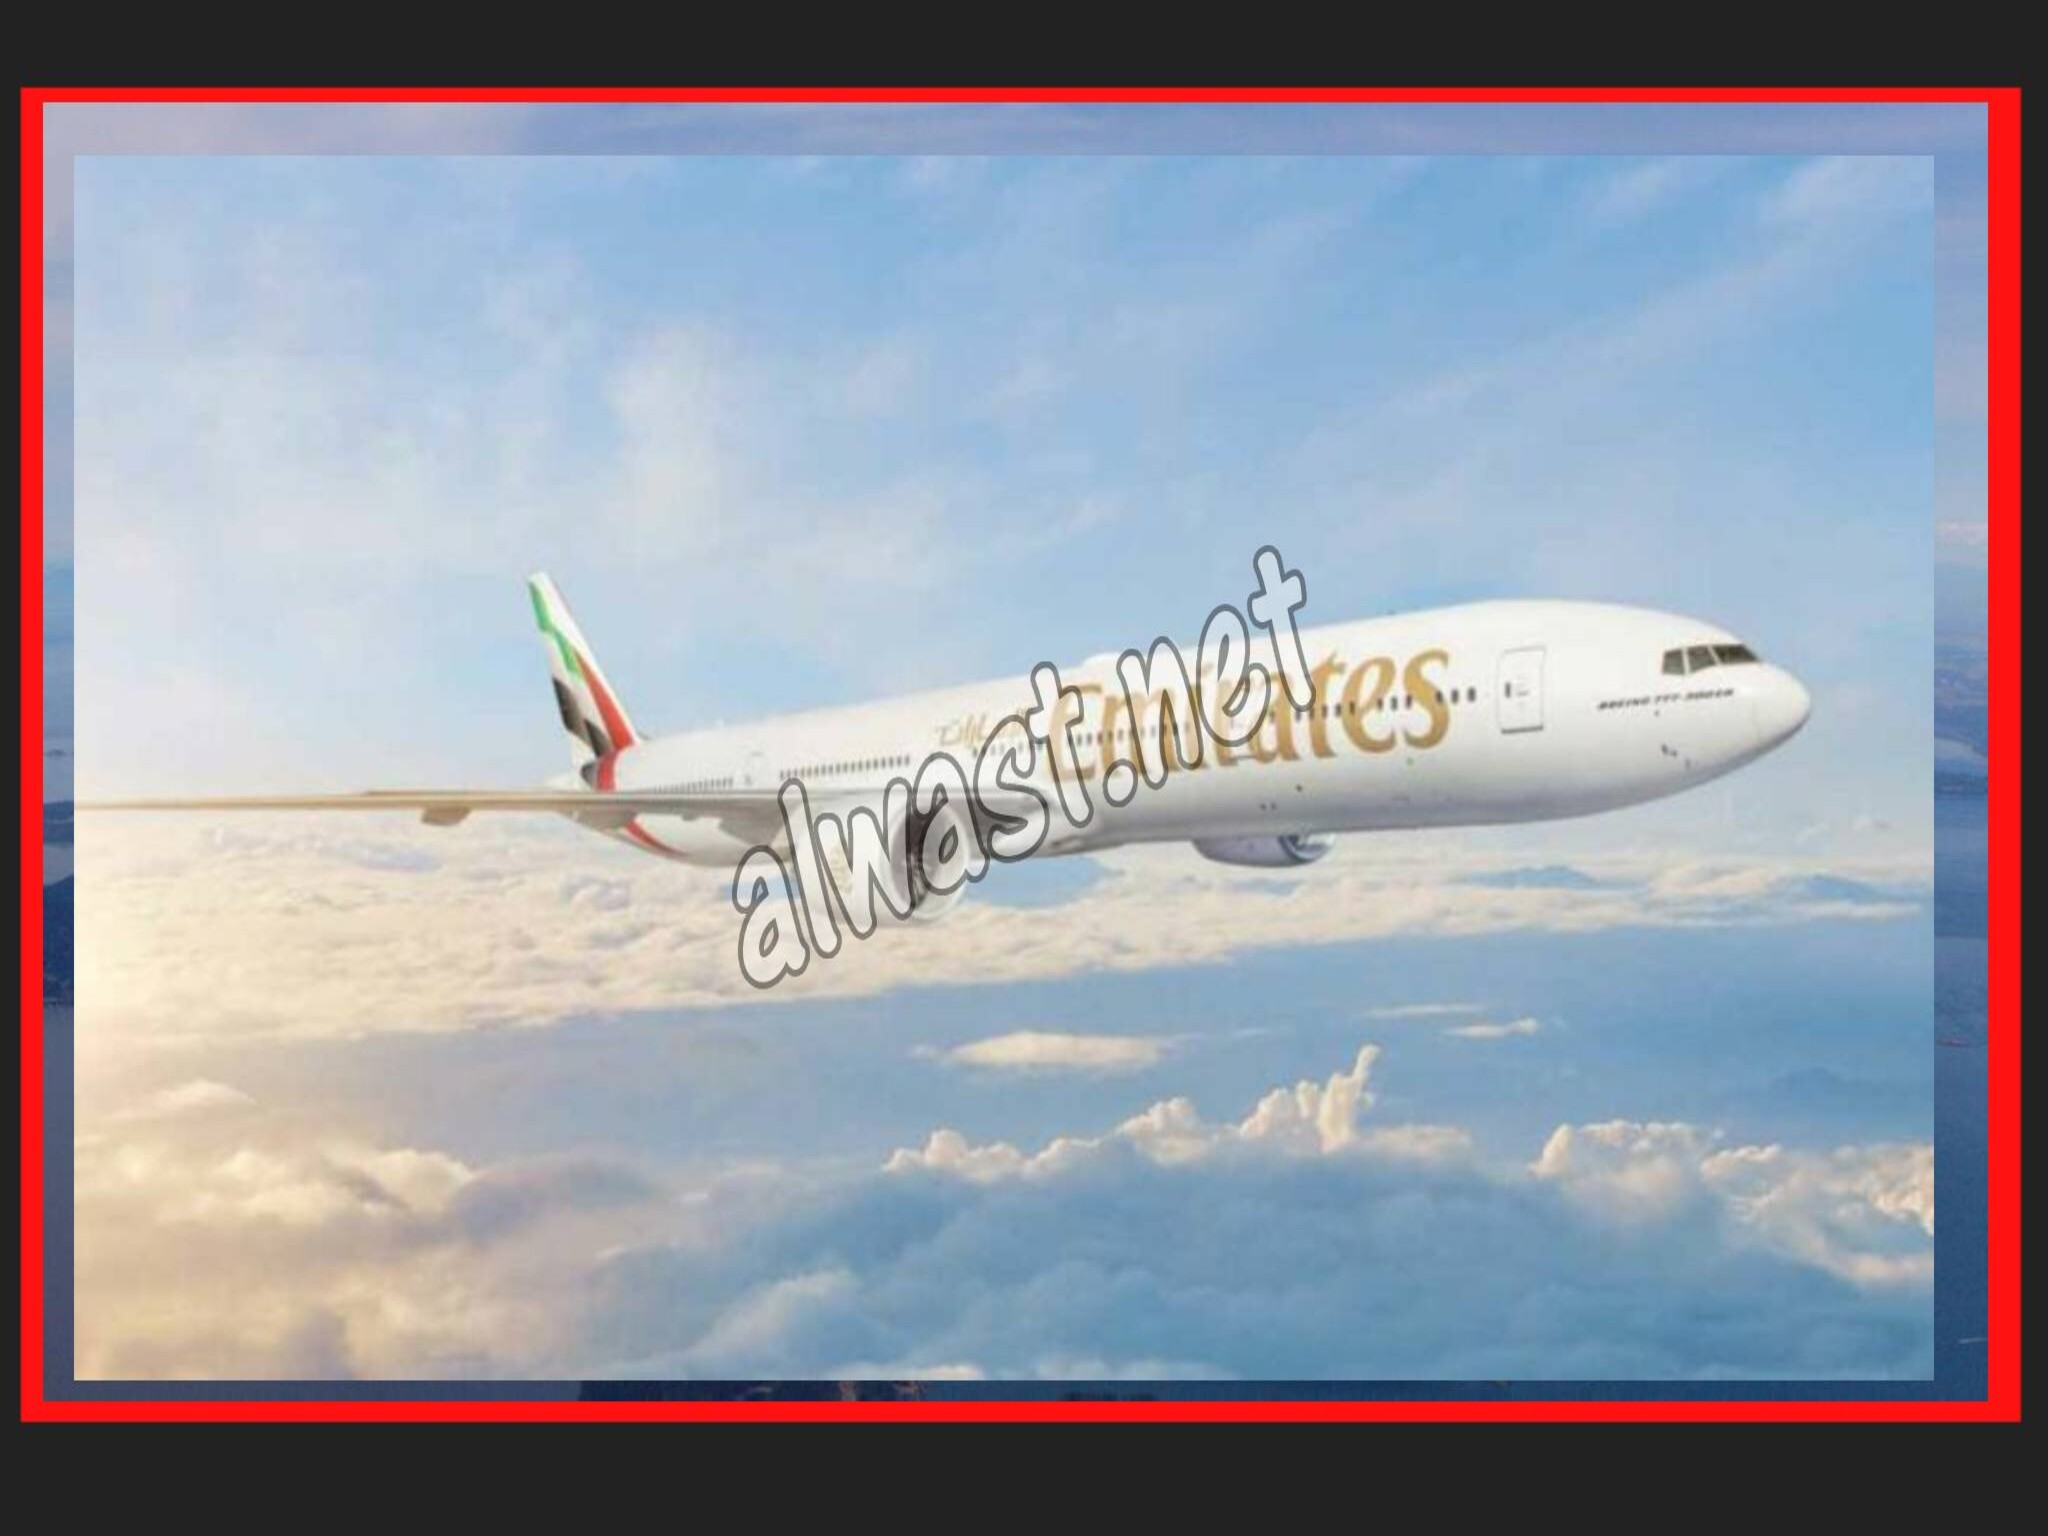 Emirates Airlines announces the resumption of flights from Dubai to an African country